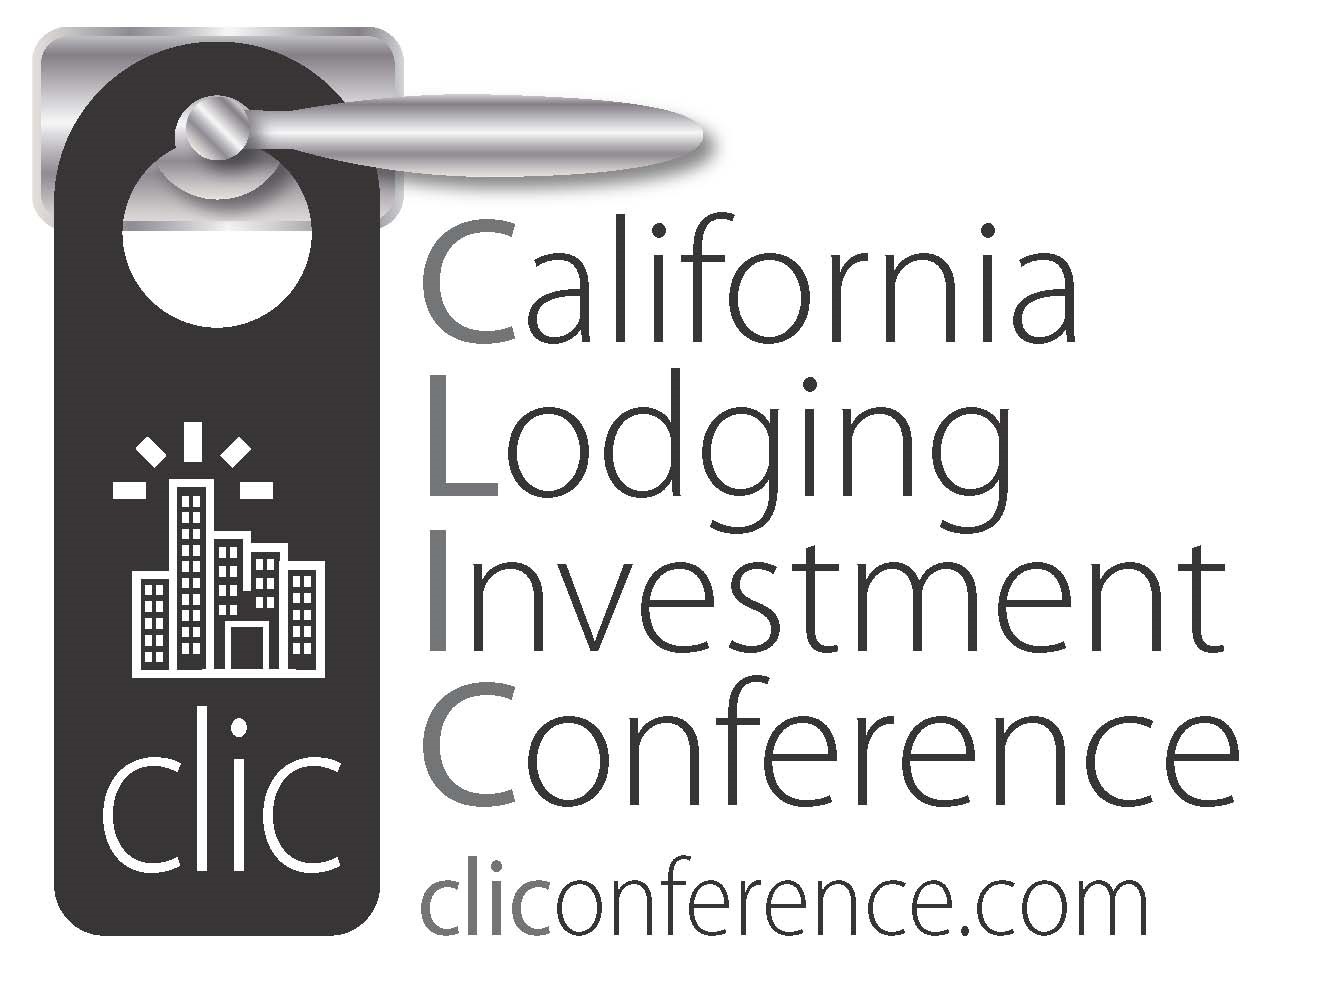 ClIConference logo